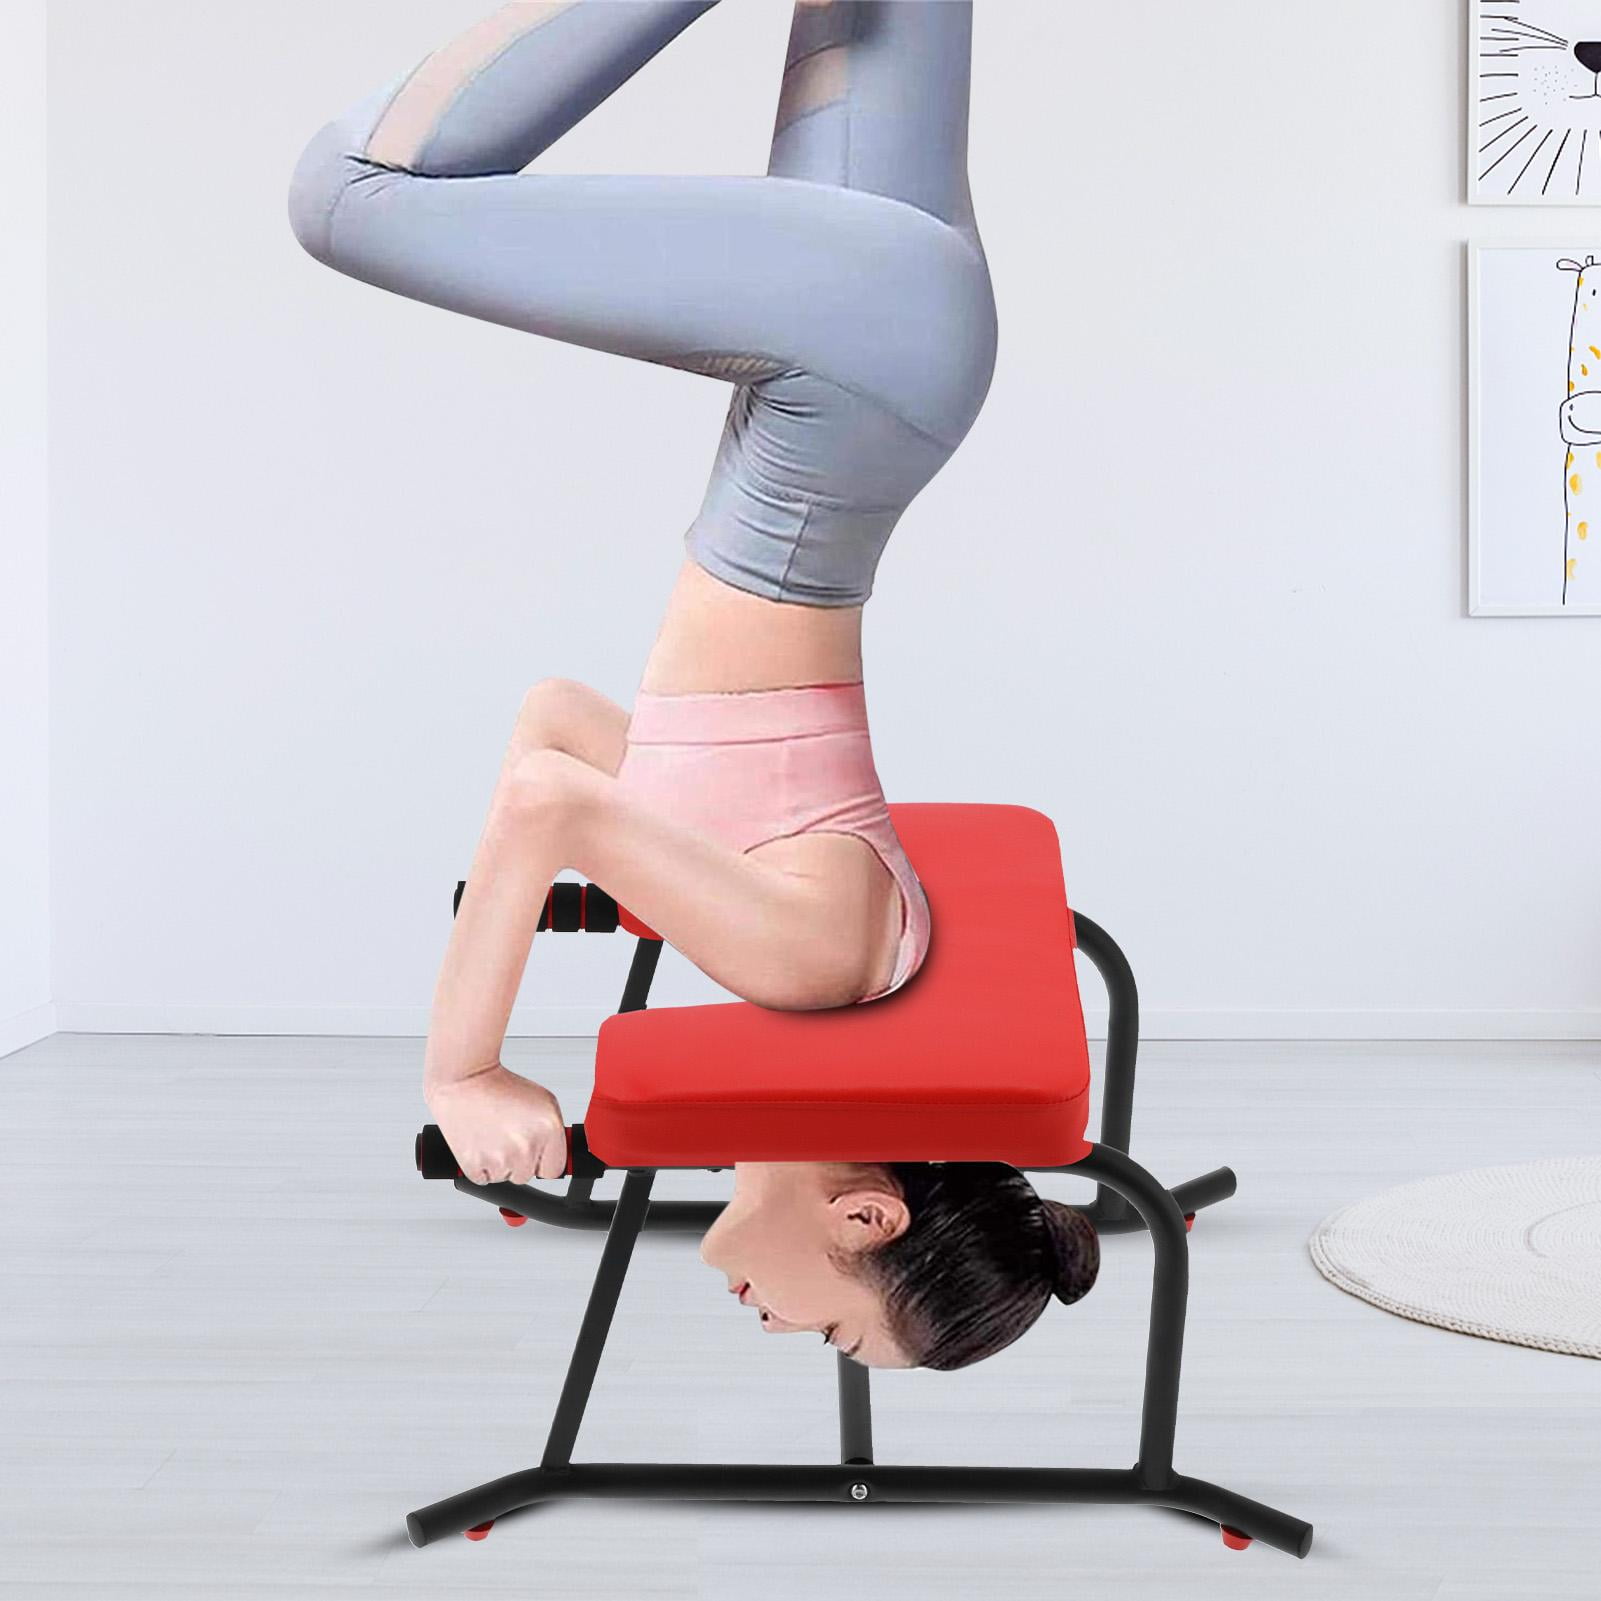 Details about   Yoga Inversion Chair Headstand Bench Exercise Stool Headstander Fitness Kit Red 